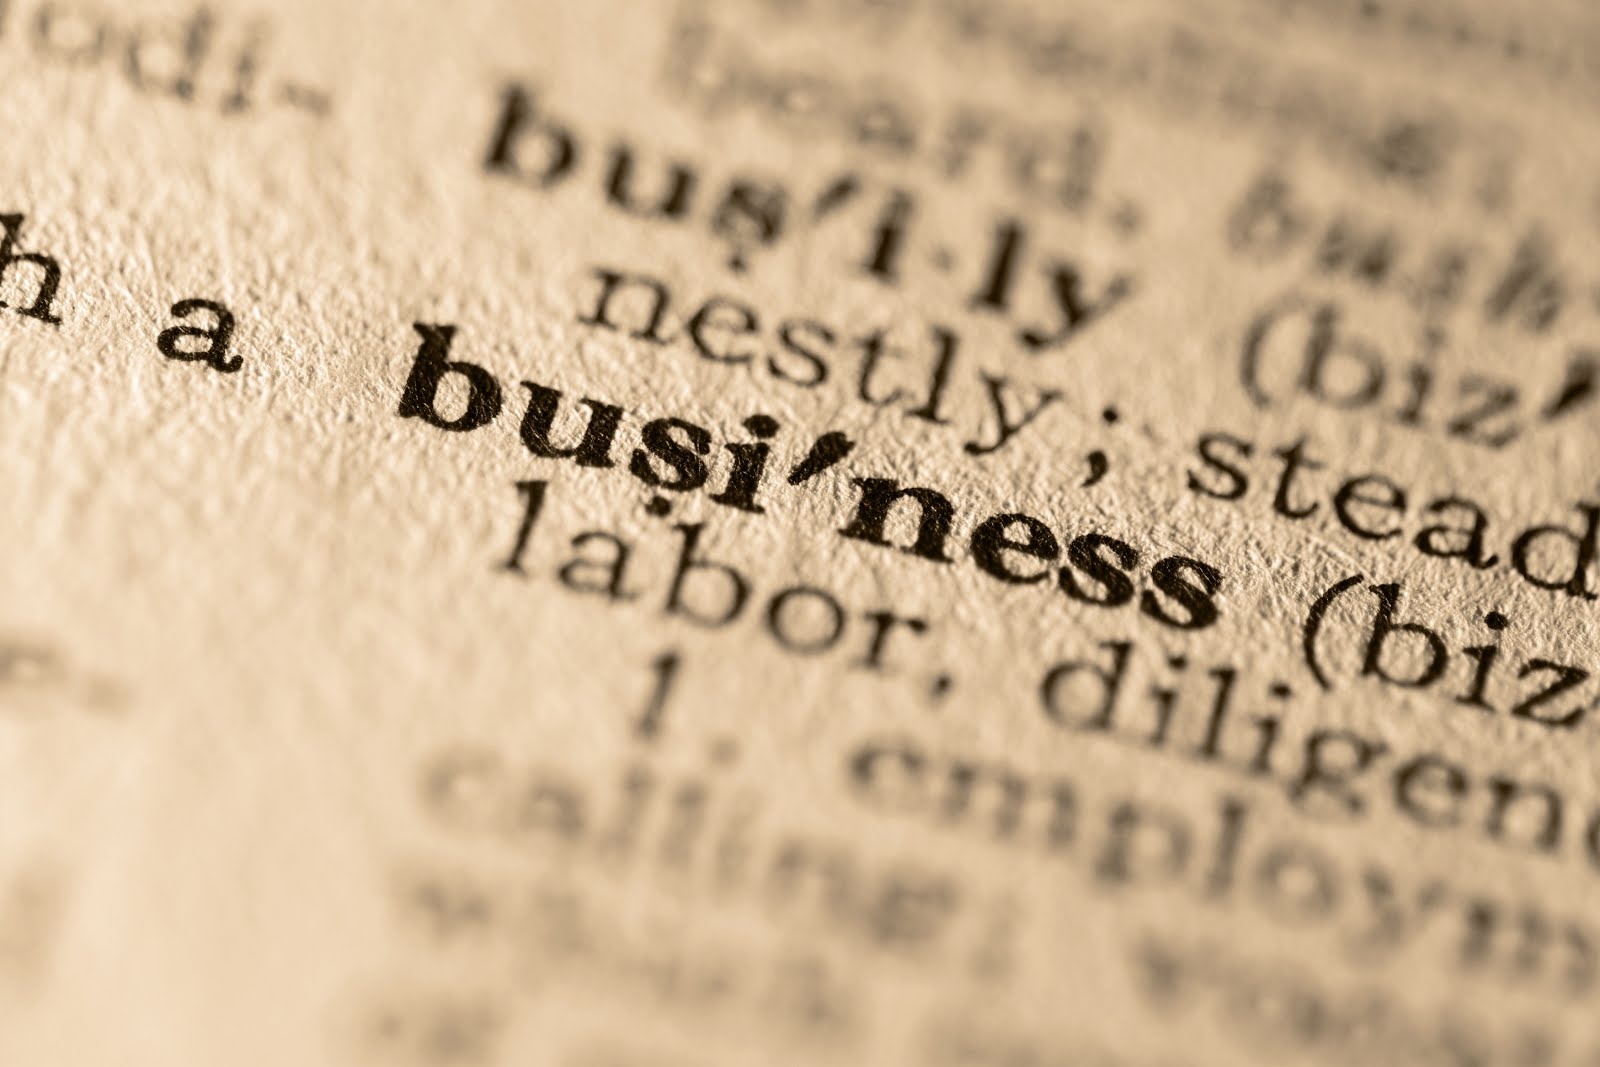 You can be a businessperson too! Invest in a franchise.